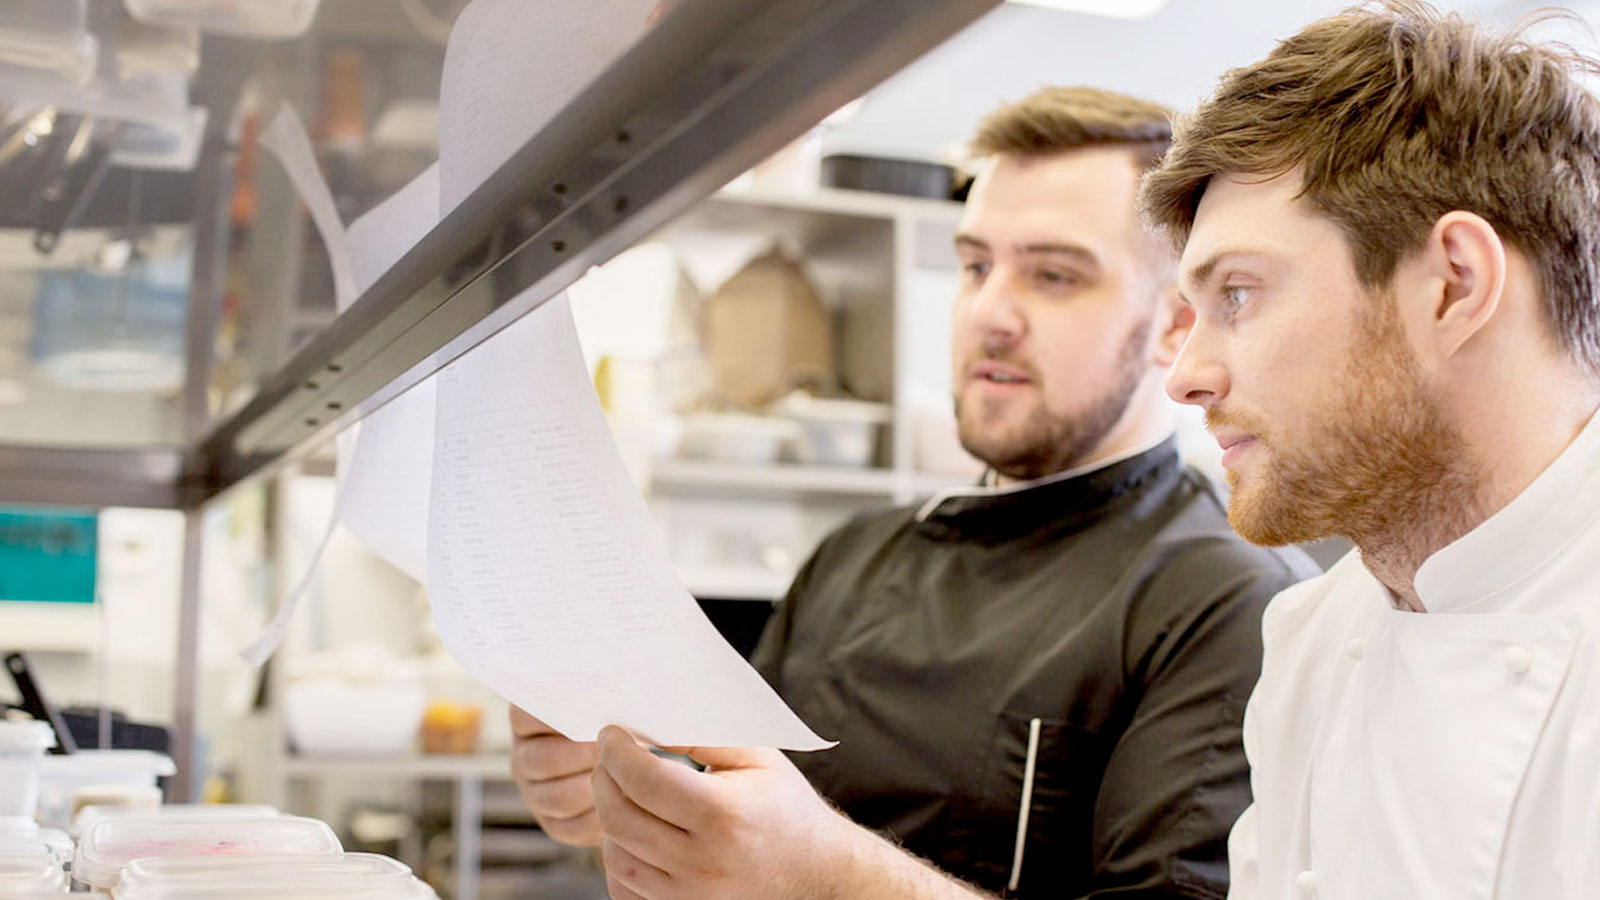 Chef and cook looking at meal orders in kitchen